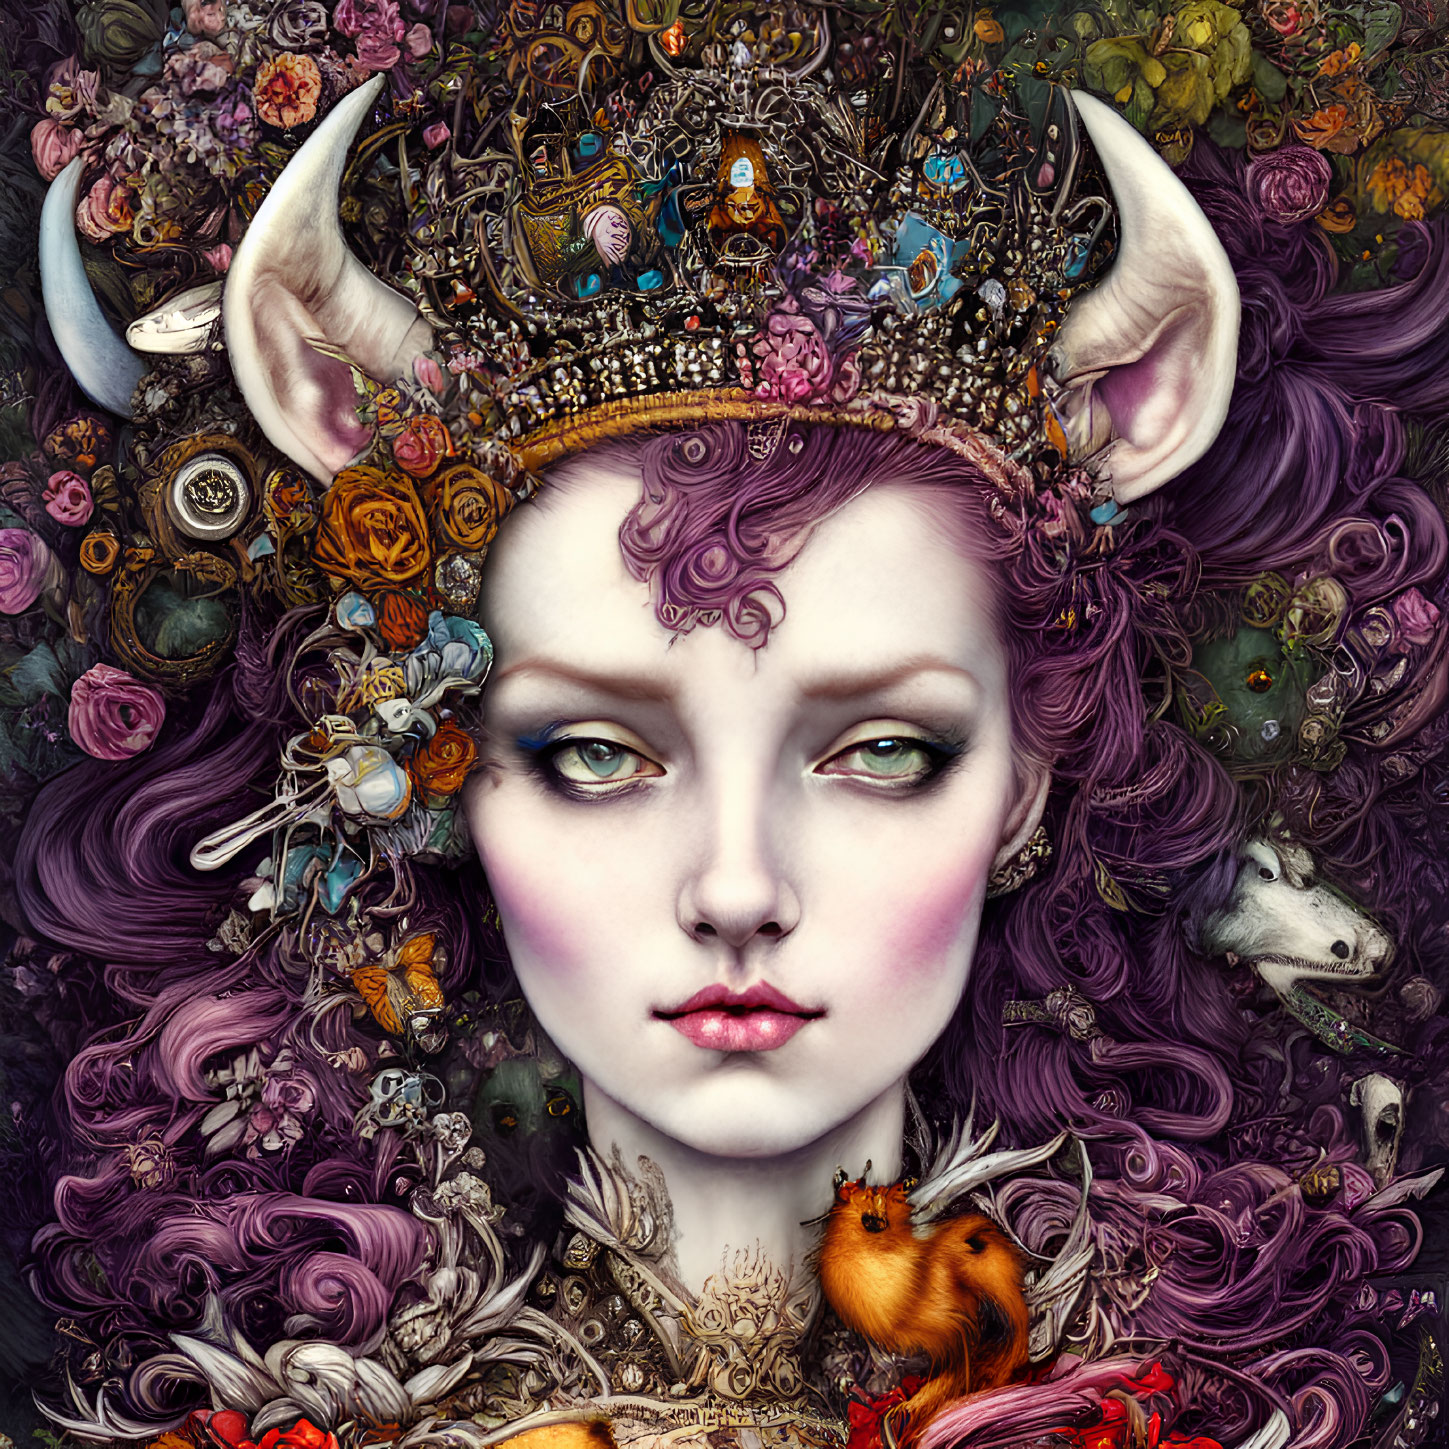 Fantastical female figure with purple hair and intricate crown among whimsical creatures and floral elements